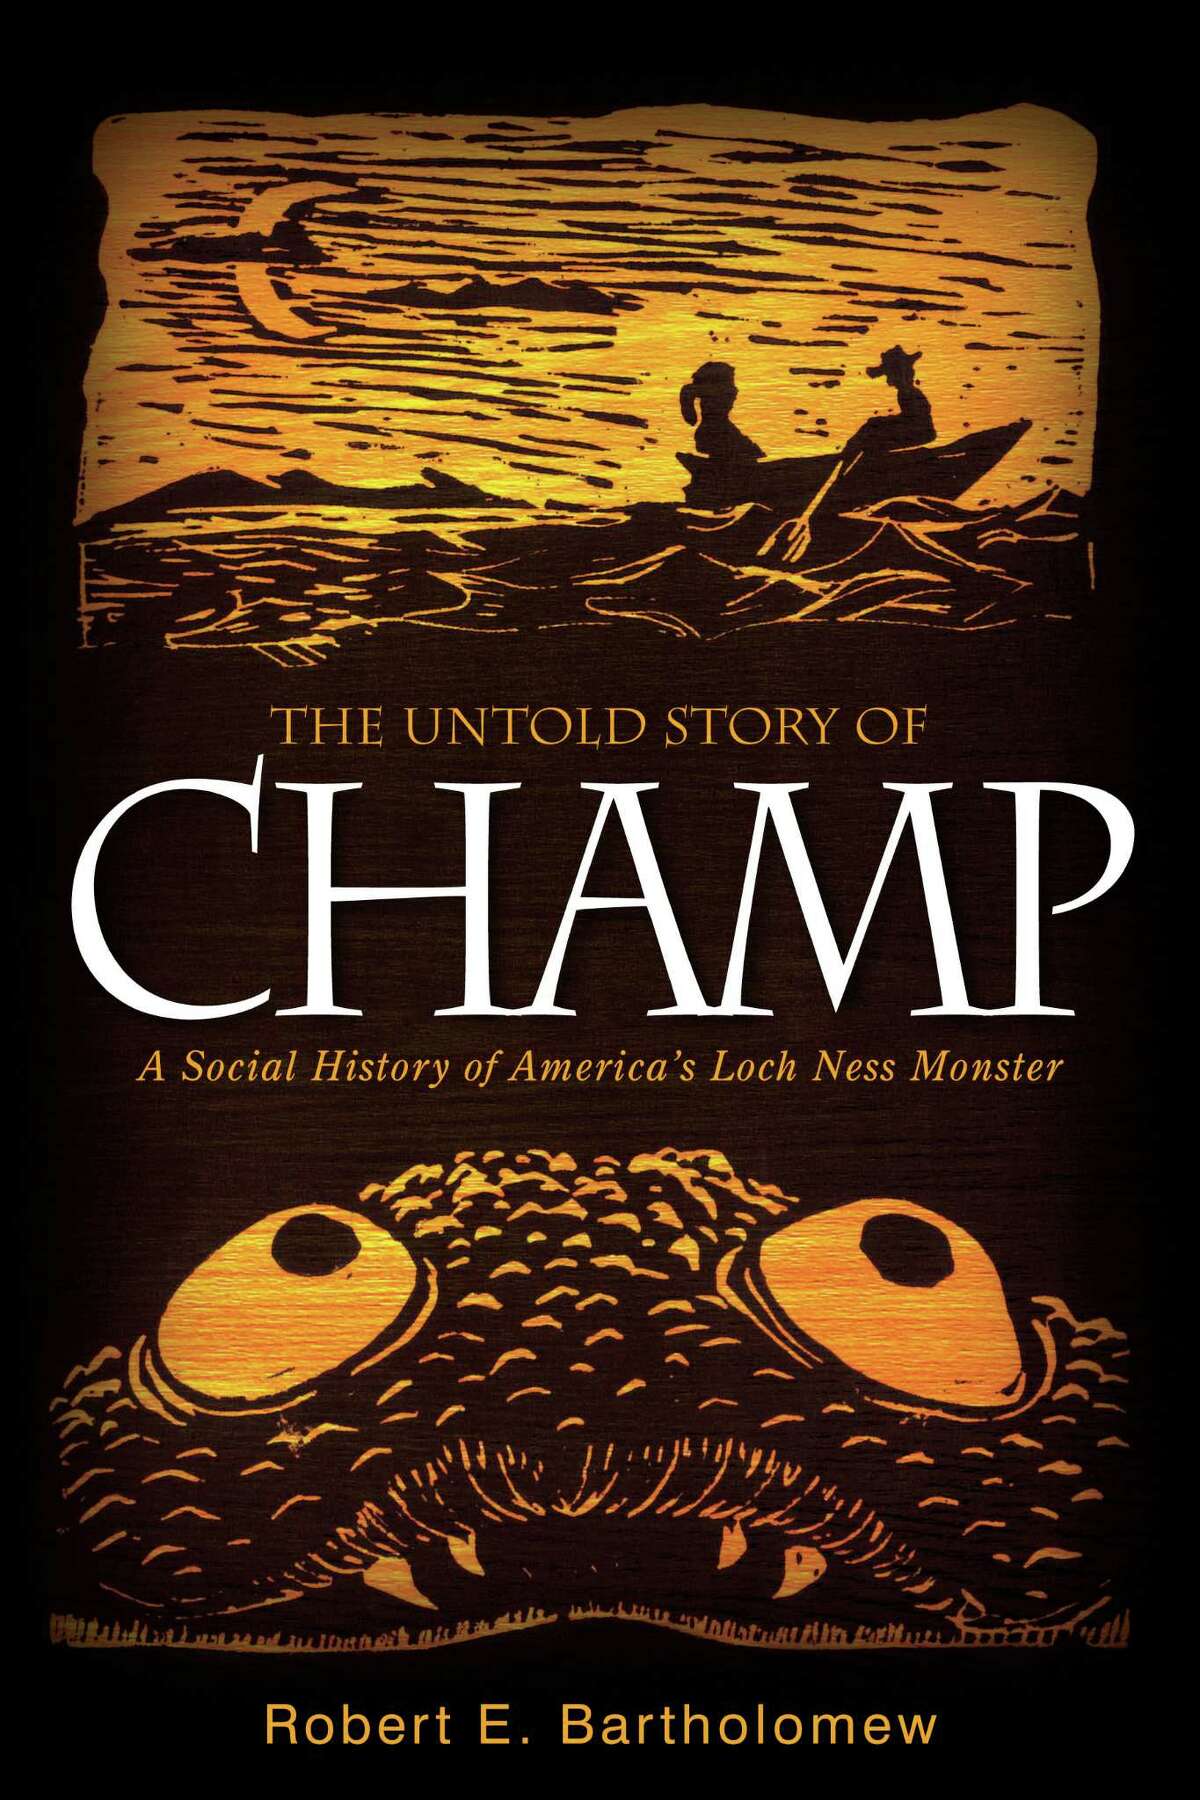 Photo courtesy SUNY Press Cover of book recently published by SUNY Press.